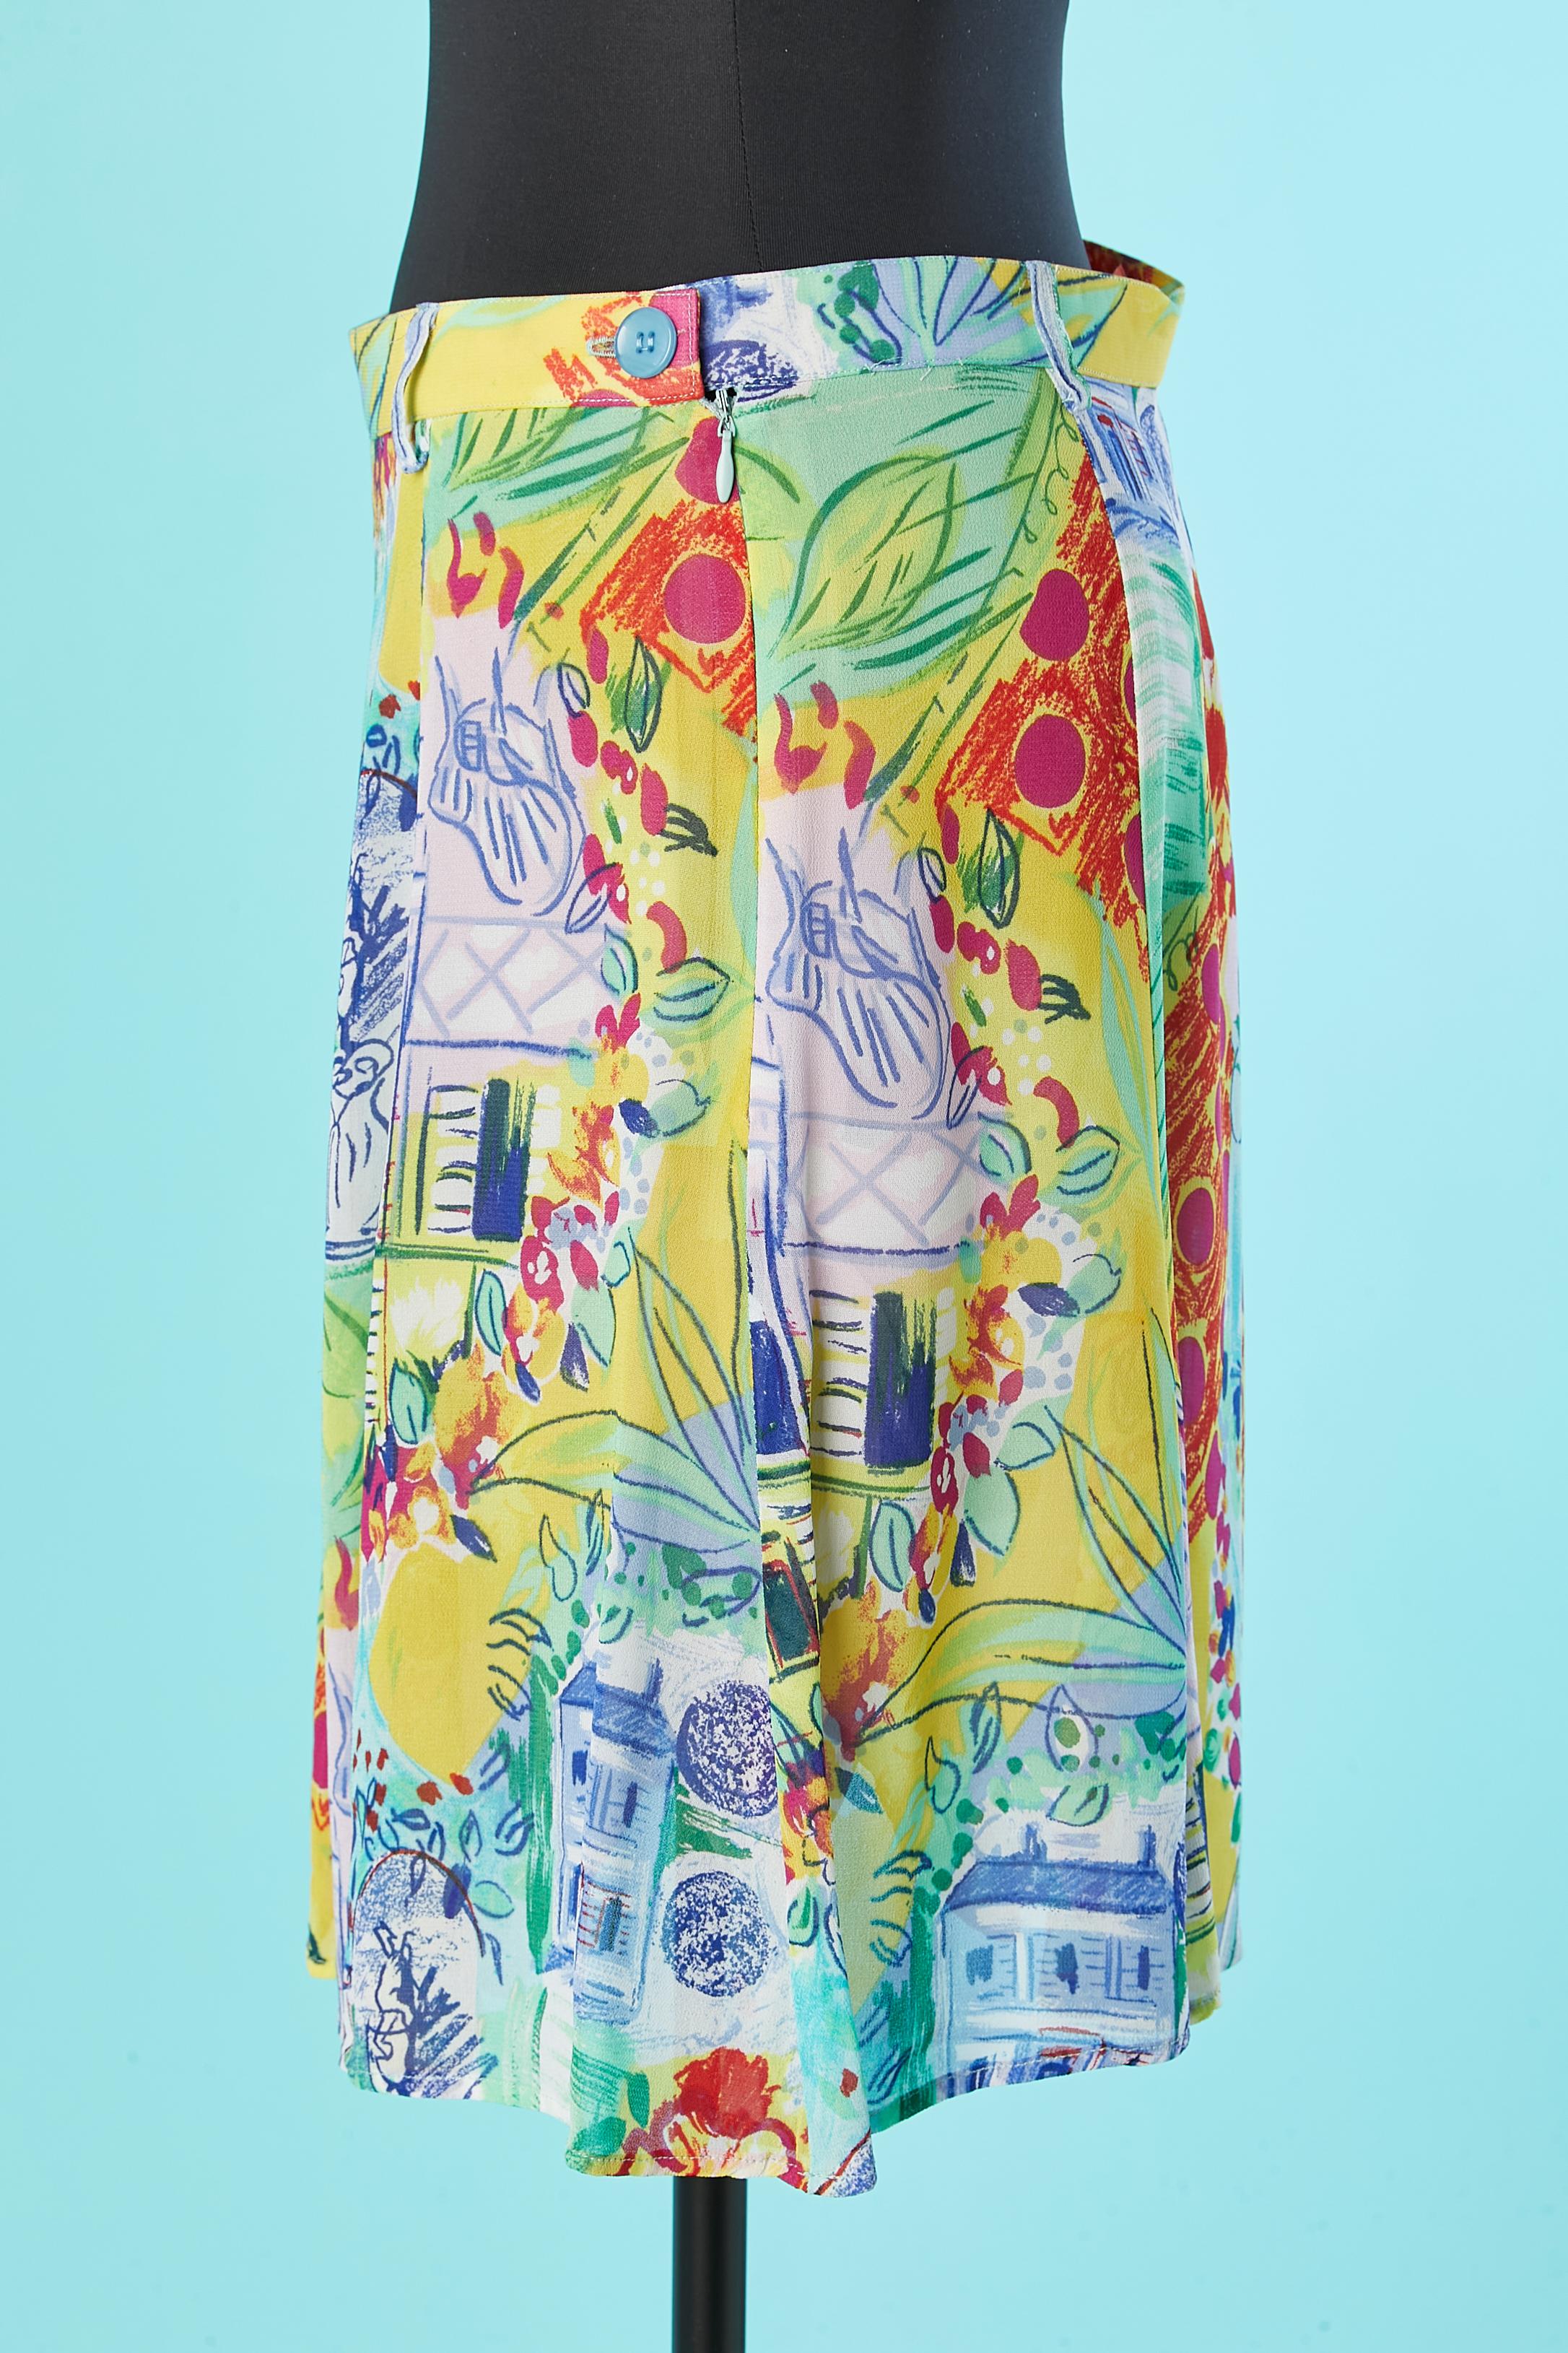 Printed skirt Kenzo JUNGLE  In Excellent Condition For Sale In Saint-Ouen-Sur-Seine, FR